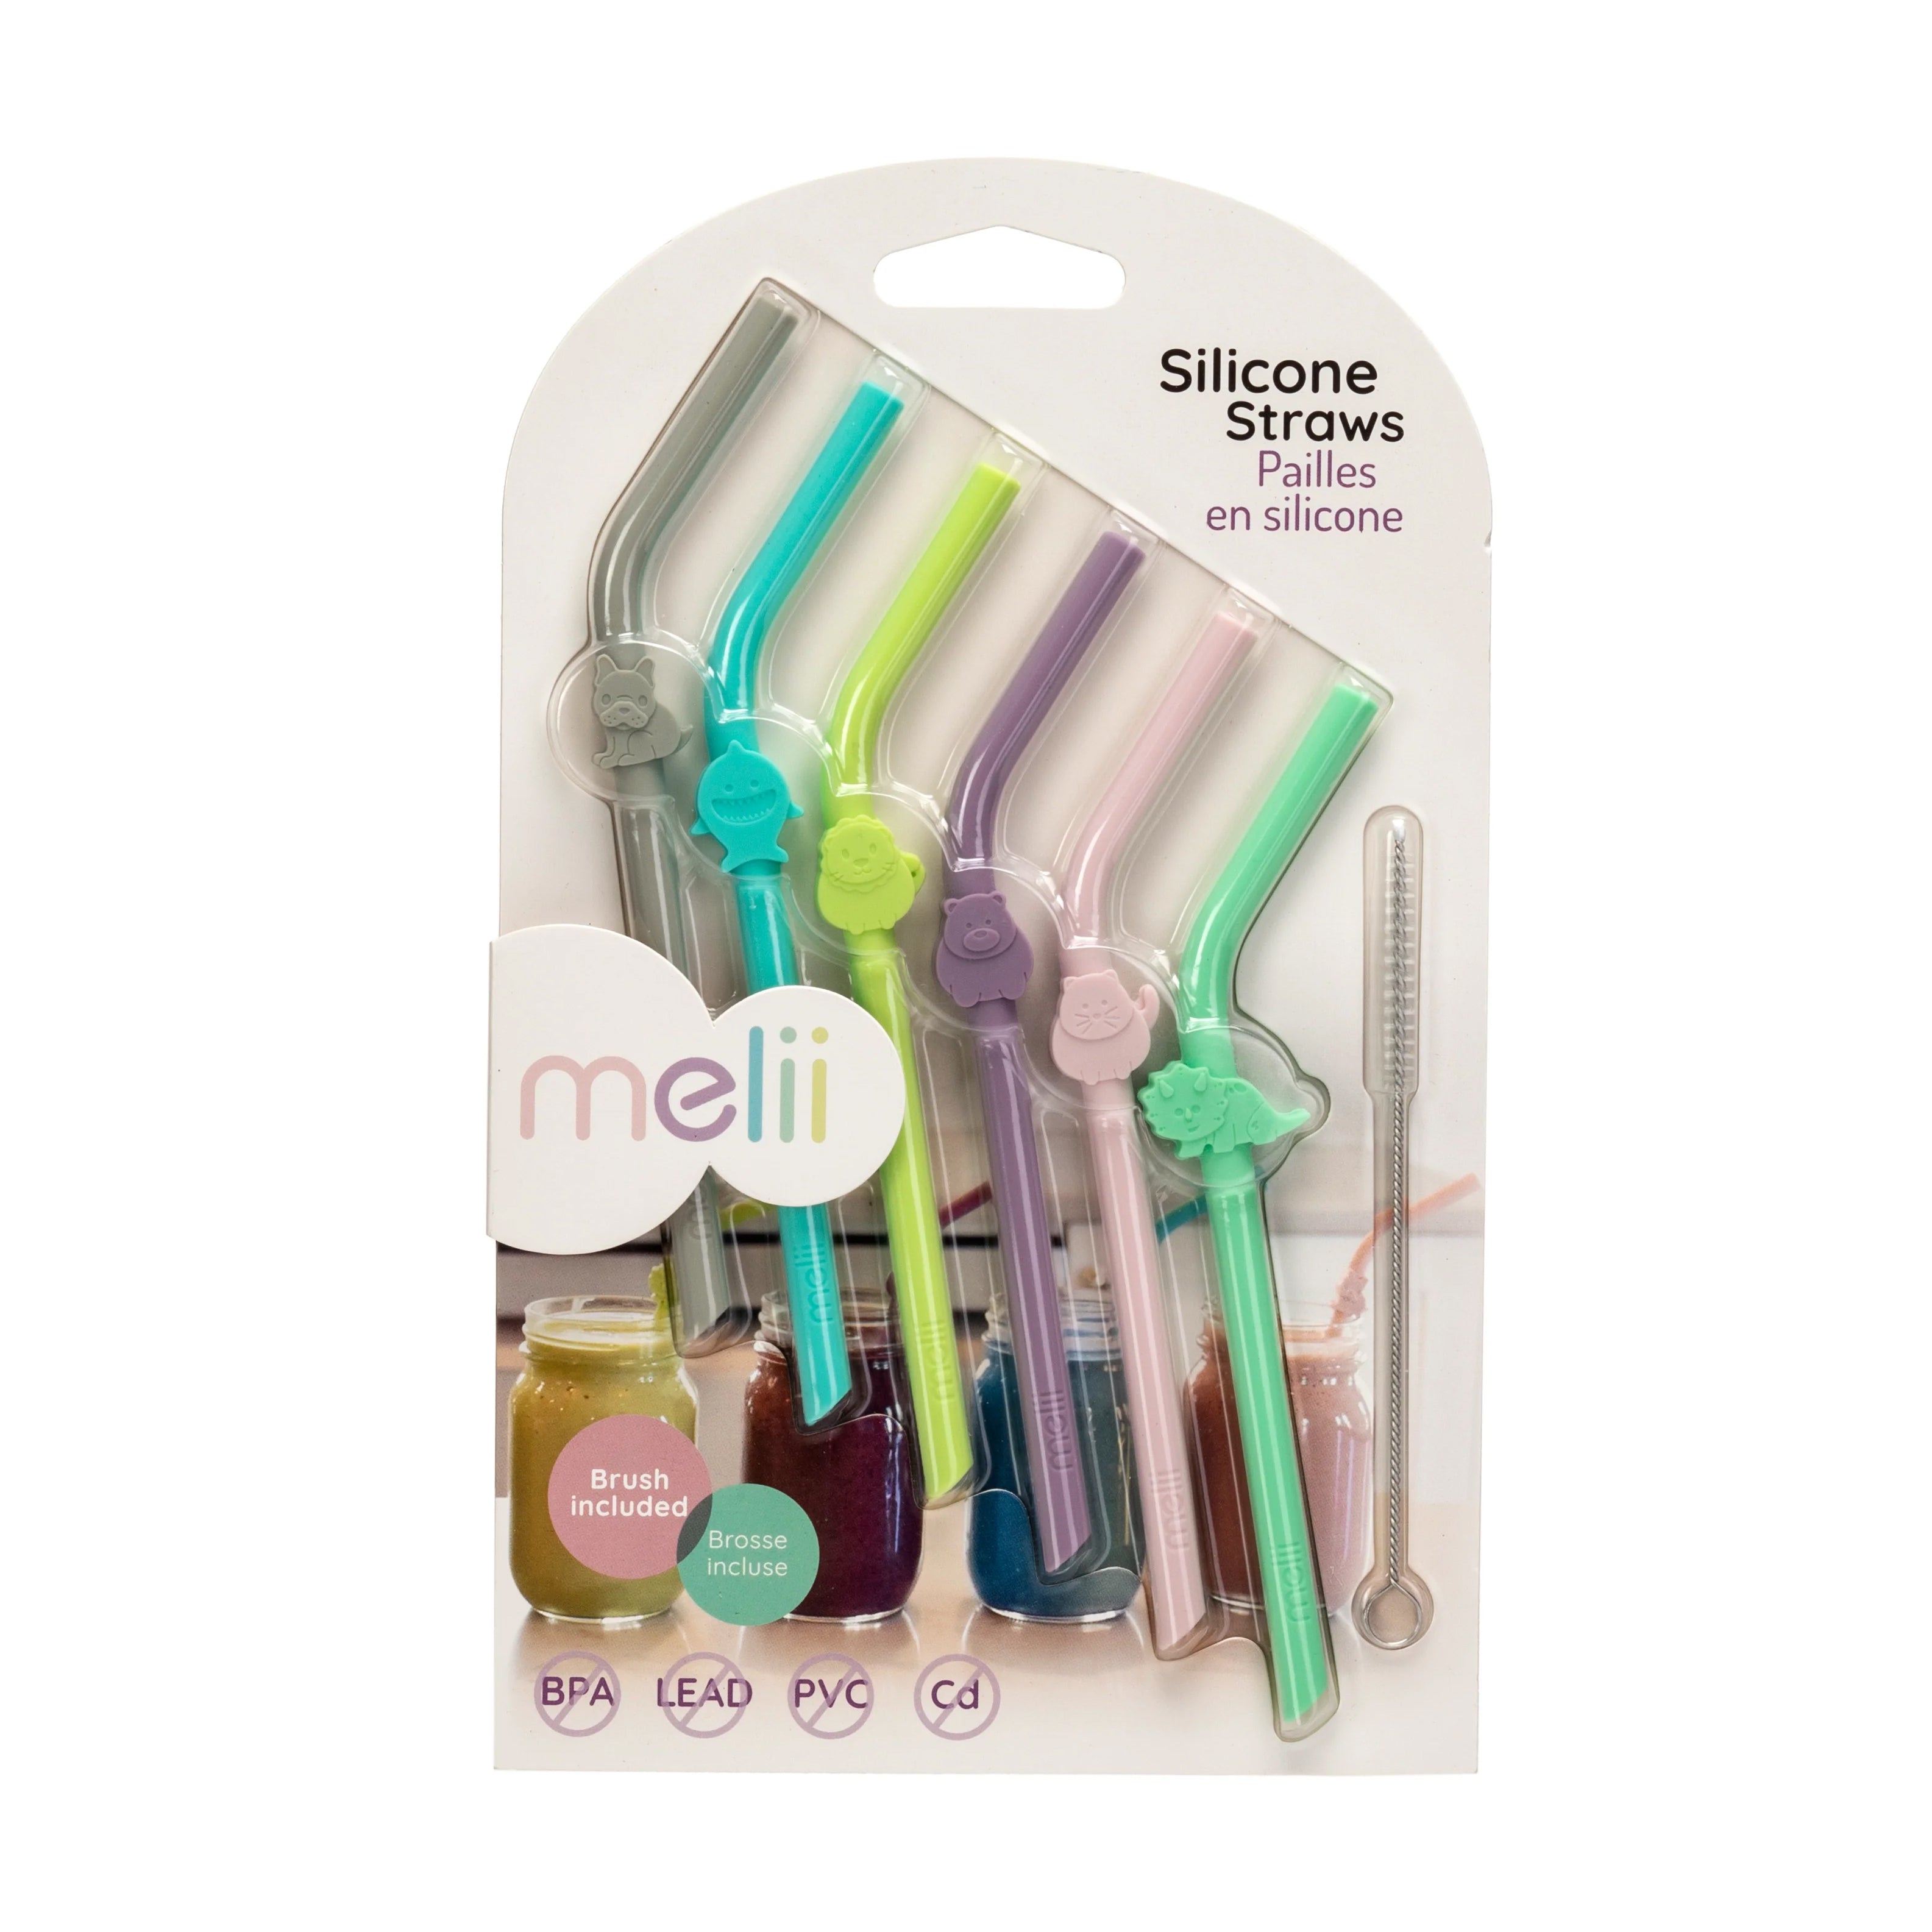 melii-6-silicone-straws-with-cleaning-brush-animals-clip-design